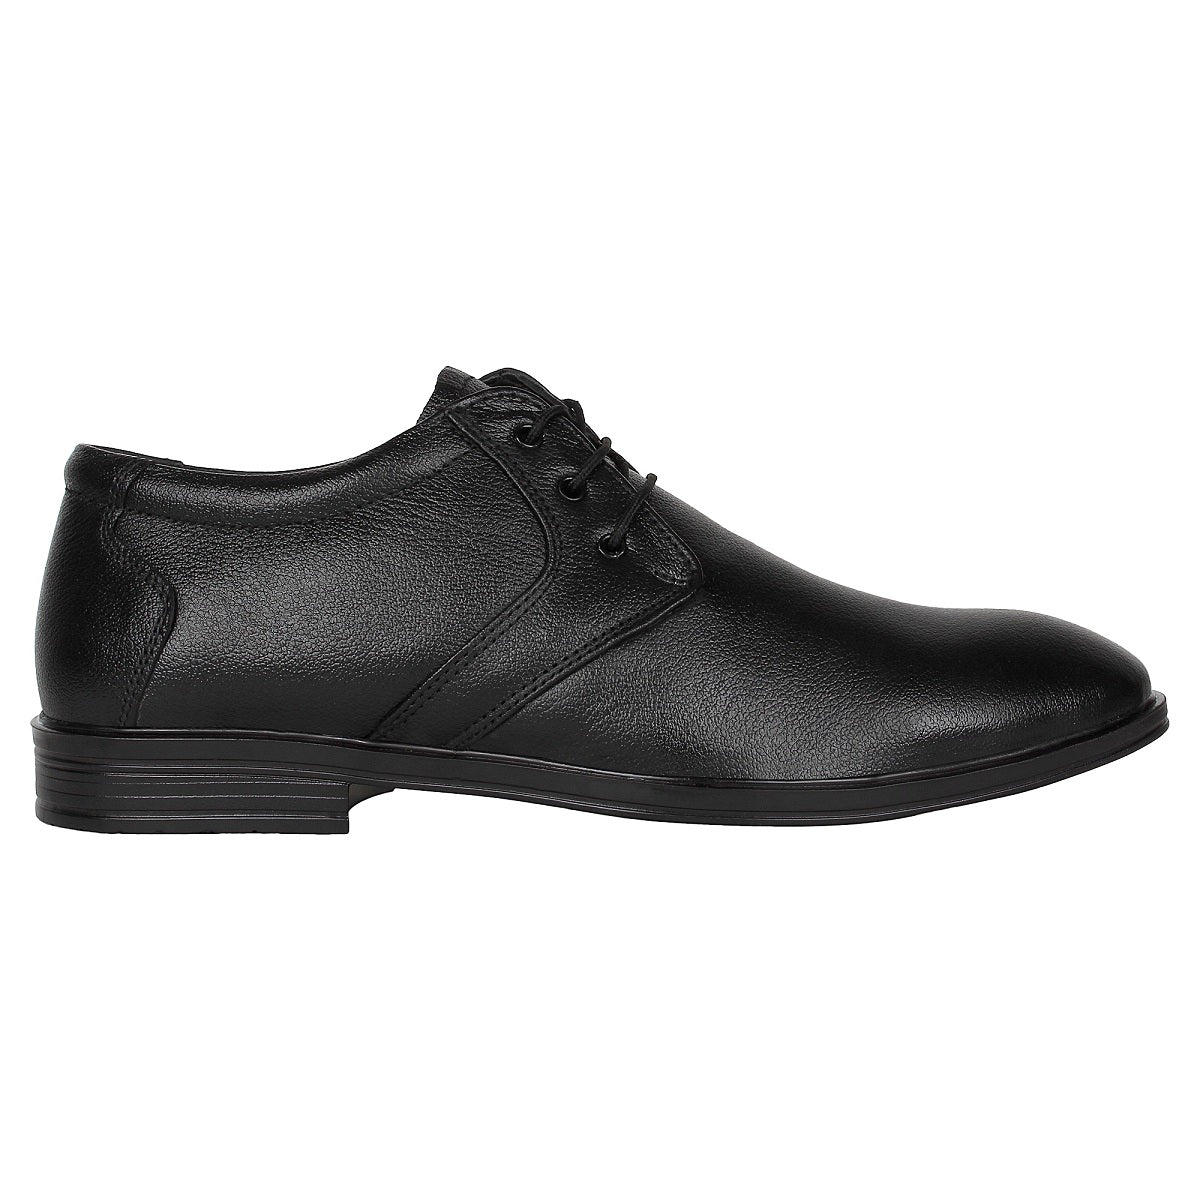 Leather Lace up Formal Shoes for Men